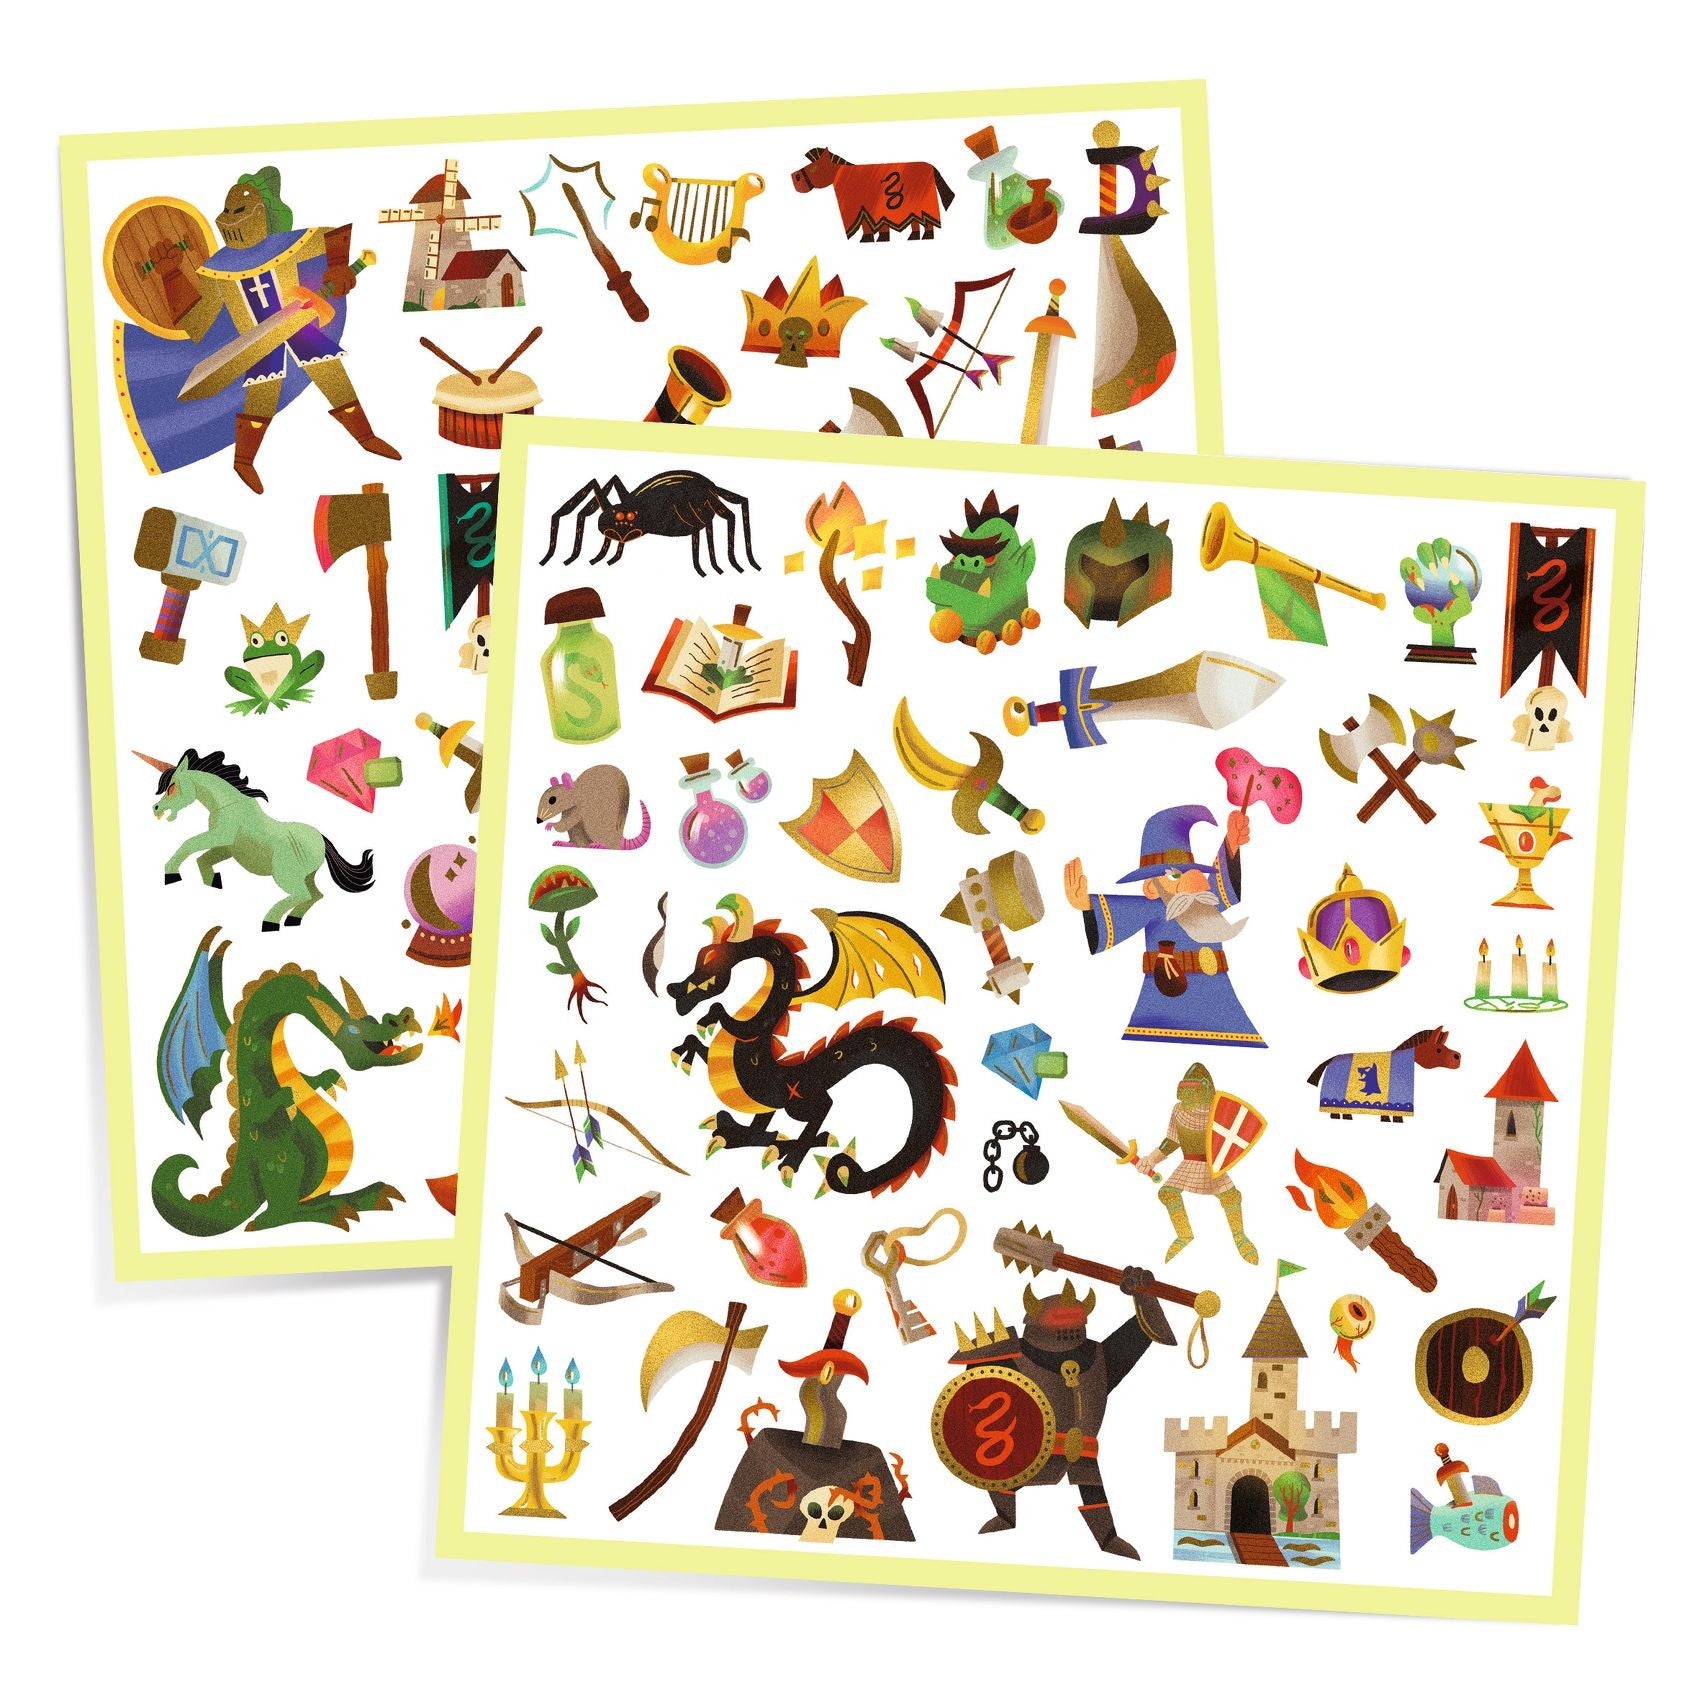 Front view of the Medieval Fantasy sticker pack against a white background. There is a graphic pointing out that these stickers have metallic elements.